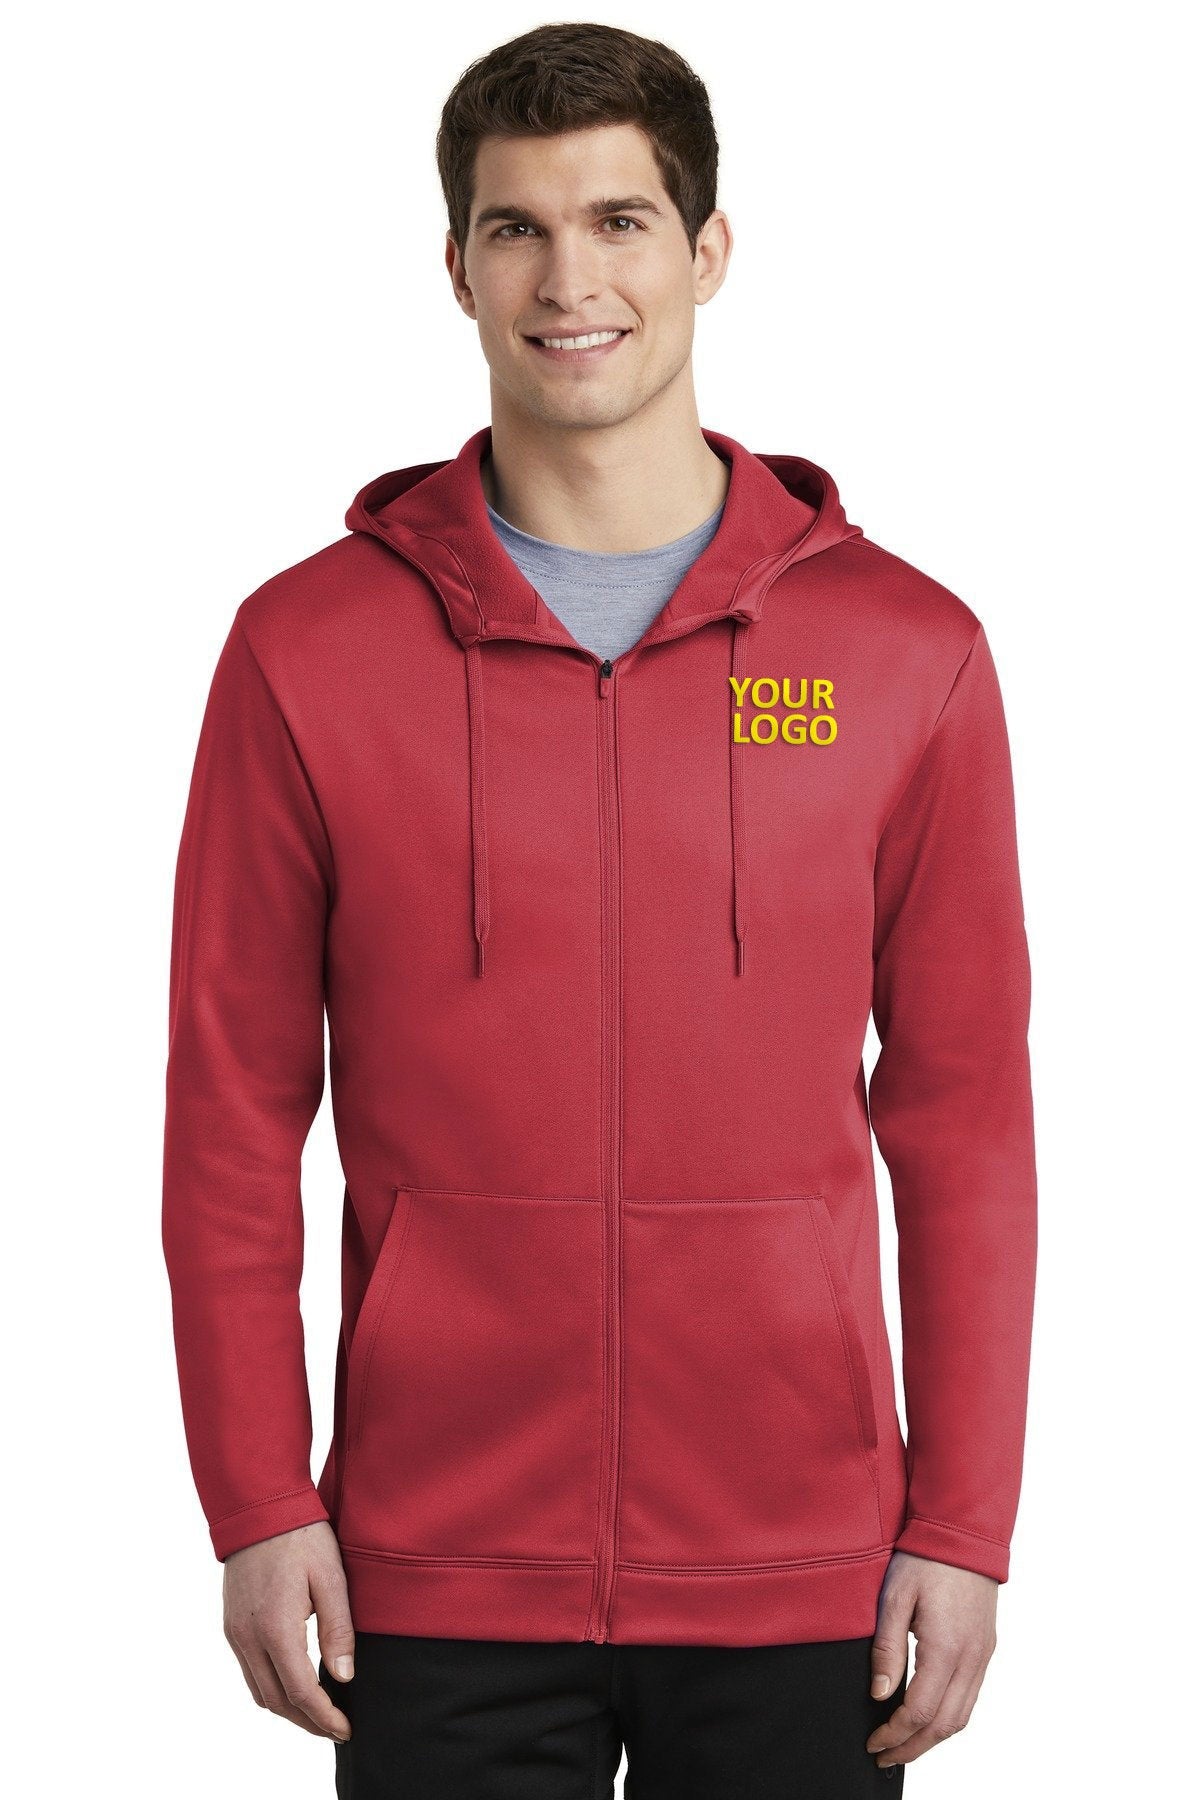 Nike Gym Red NKAH6259 printed sweatshirts for business